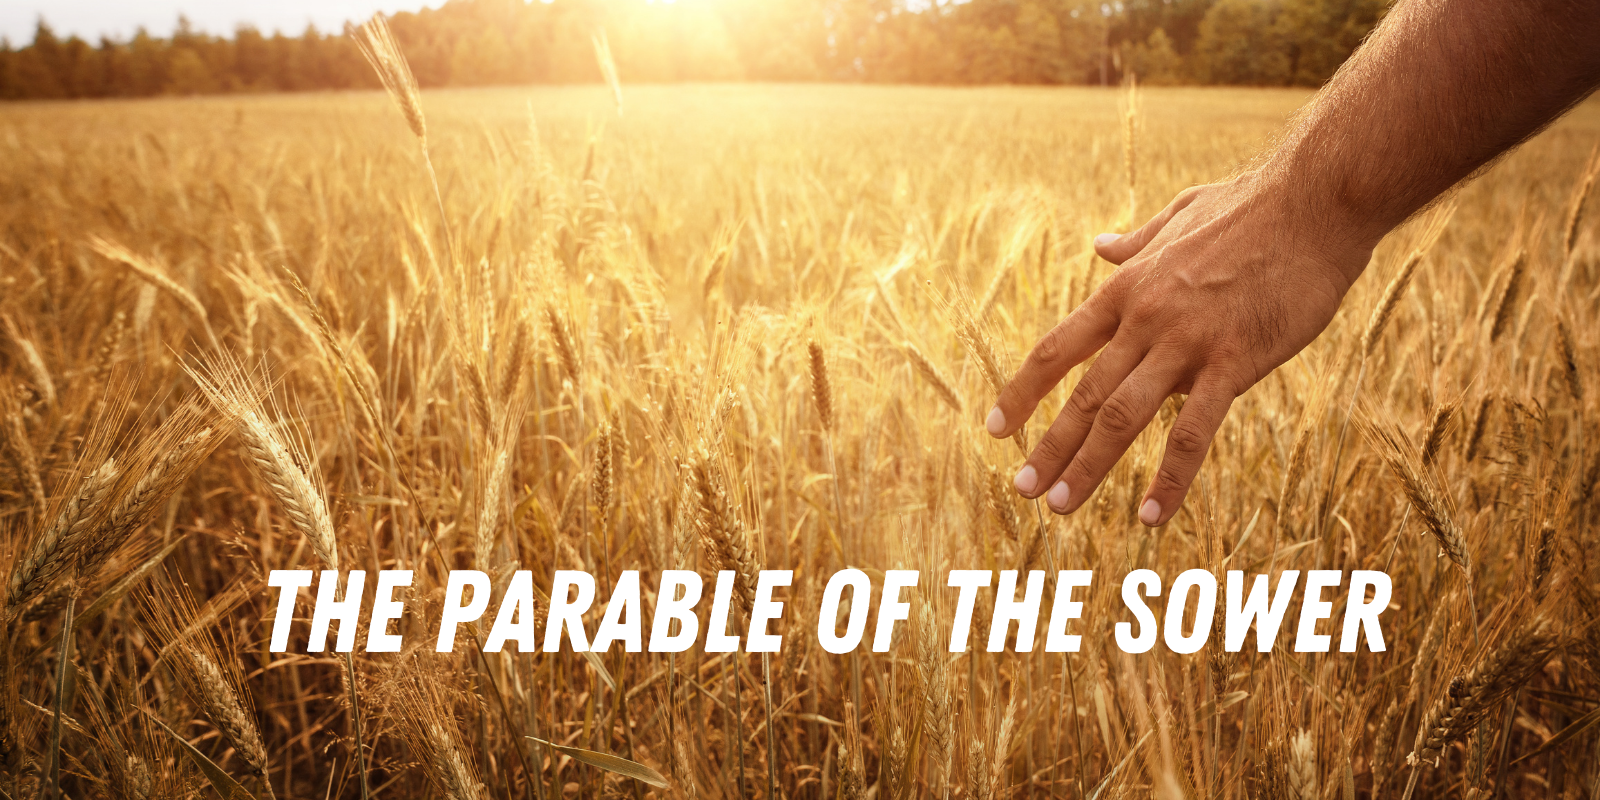 The Parable of the Sower - Preachers Corner